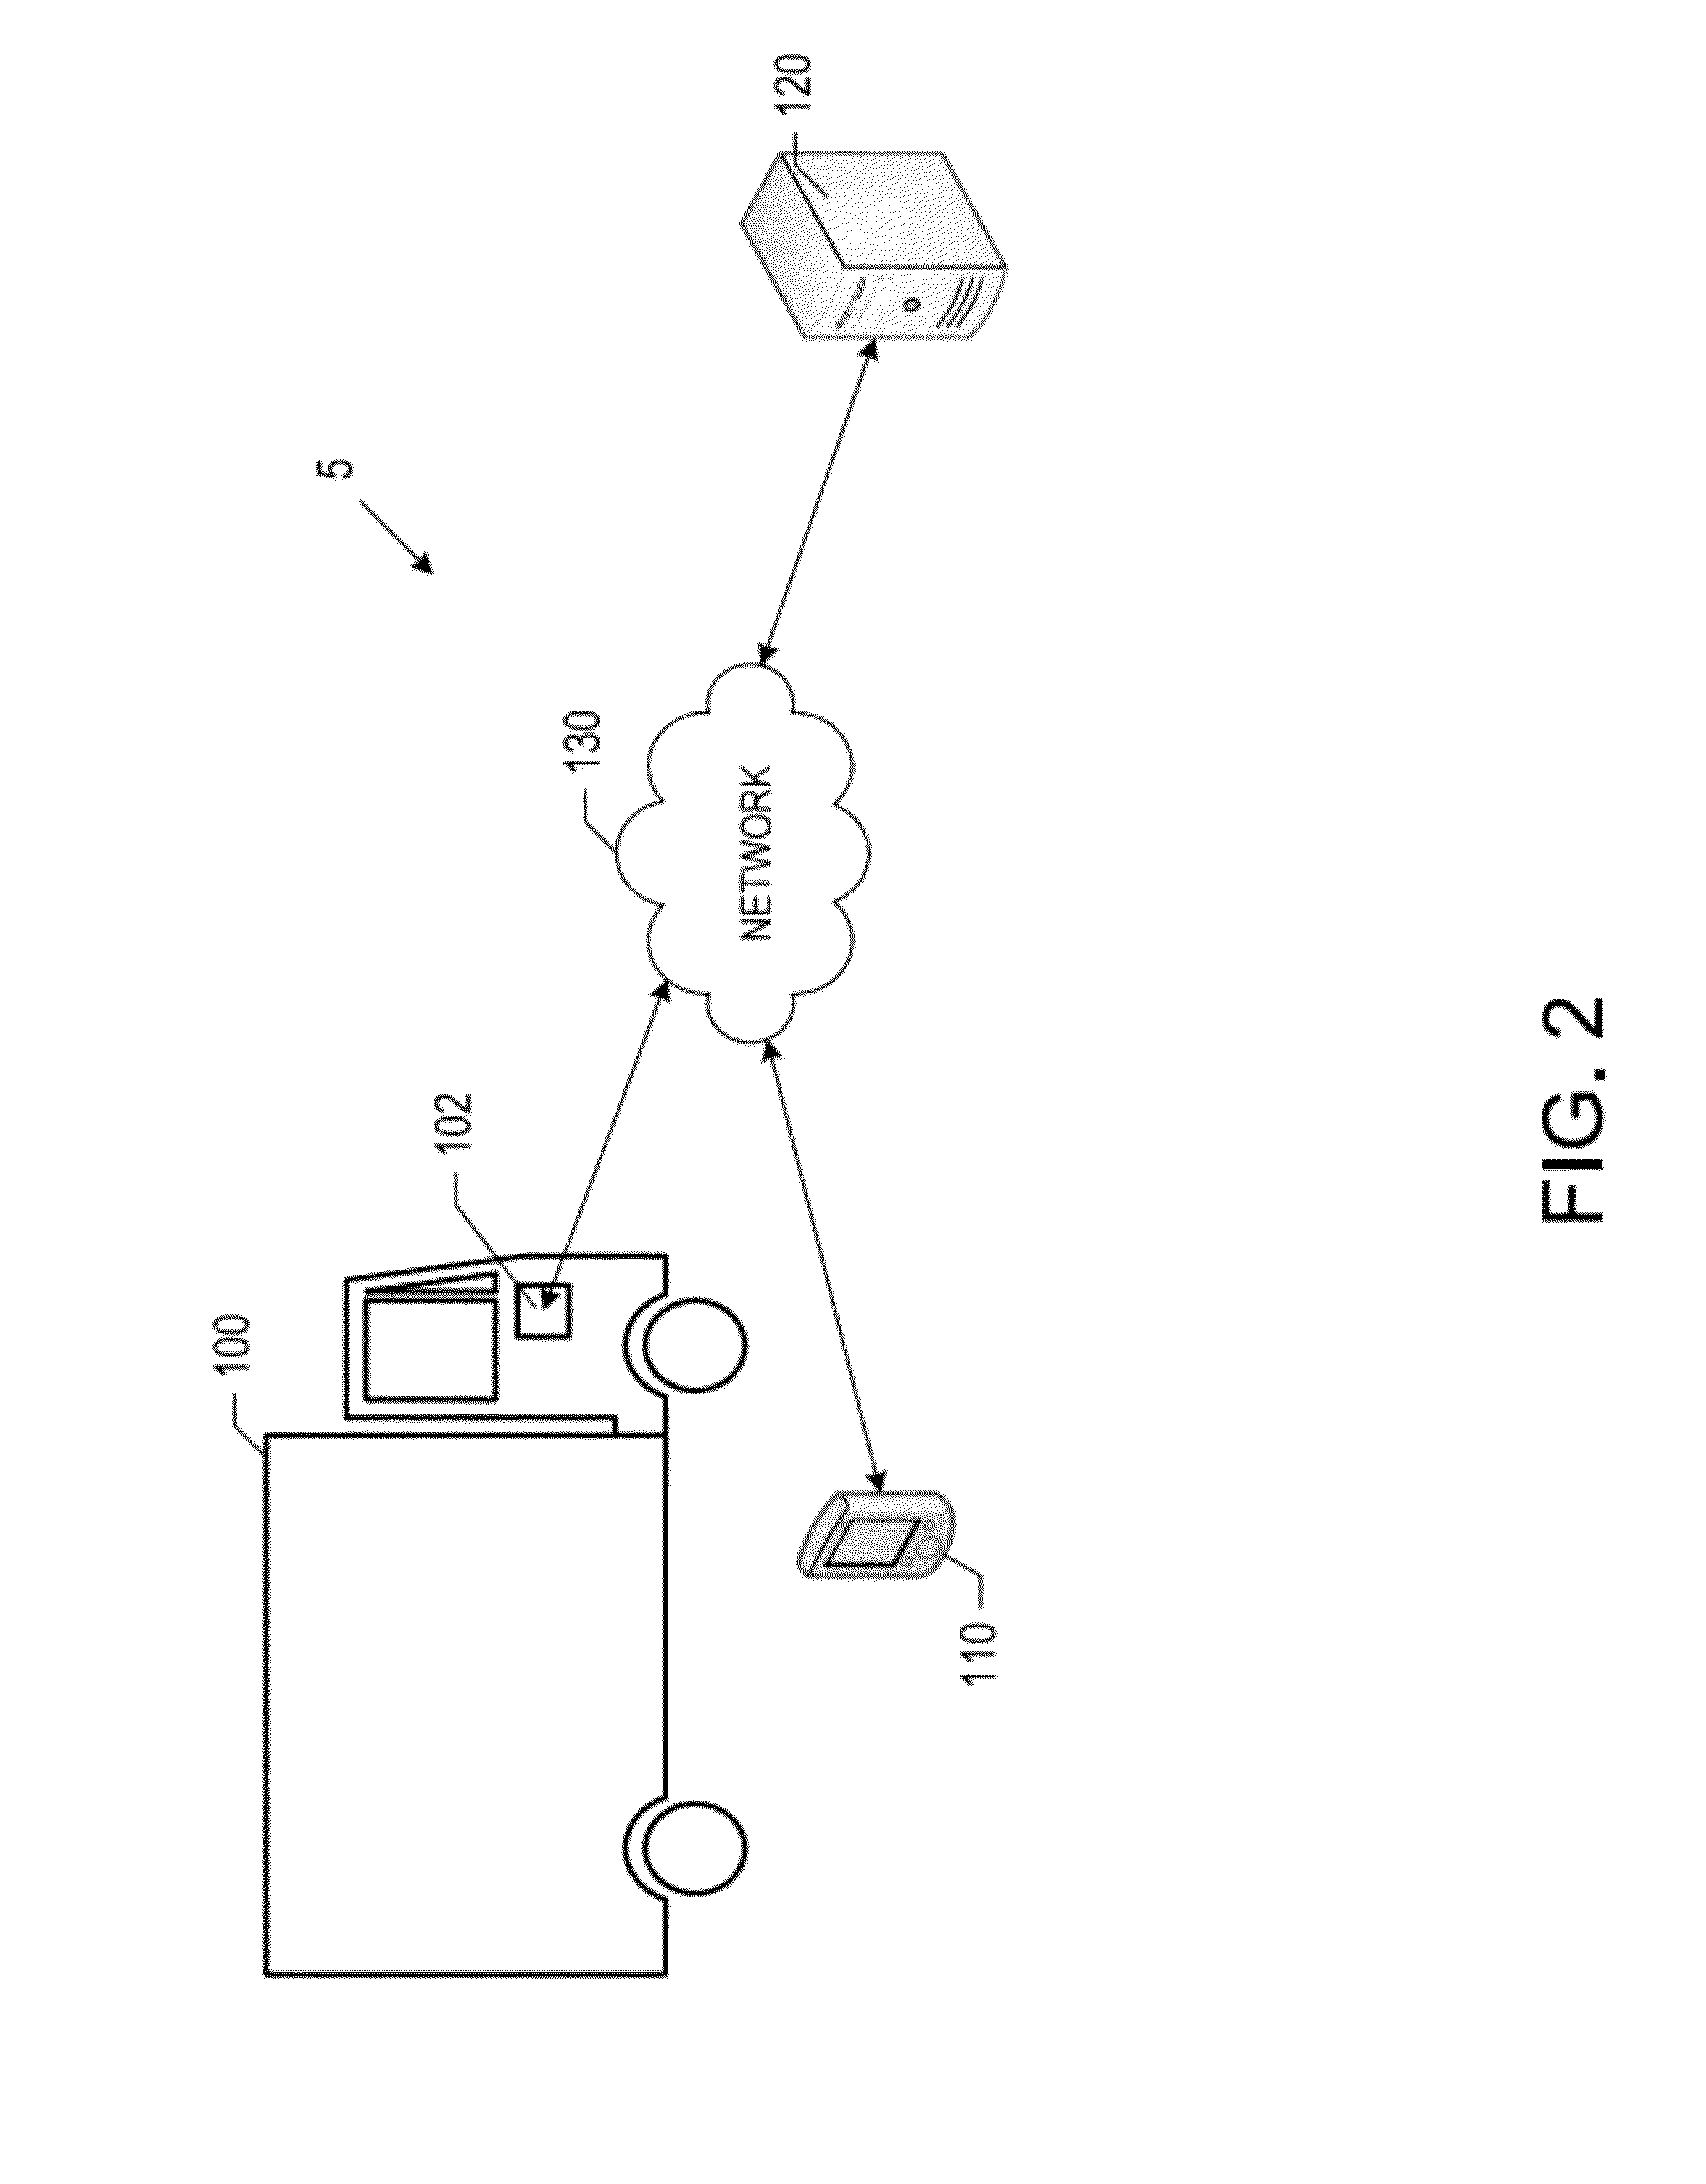 Systems and methods for assessing delivery performance based on operational data